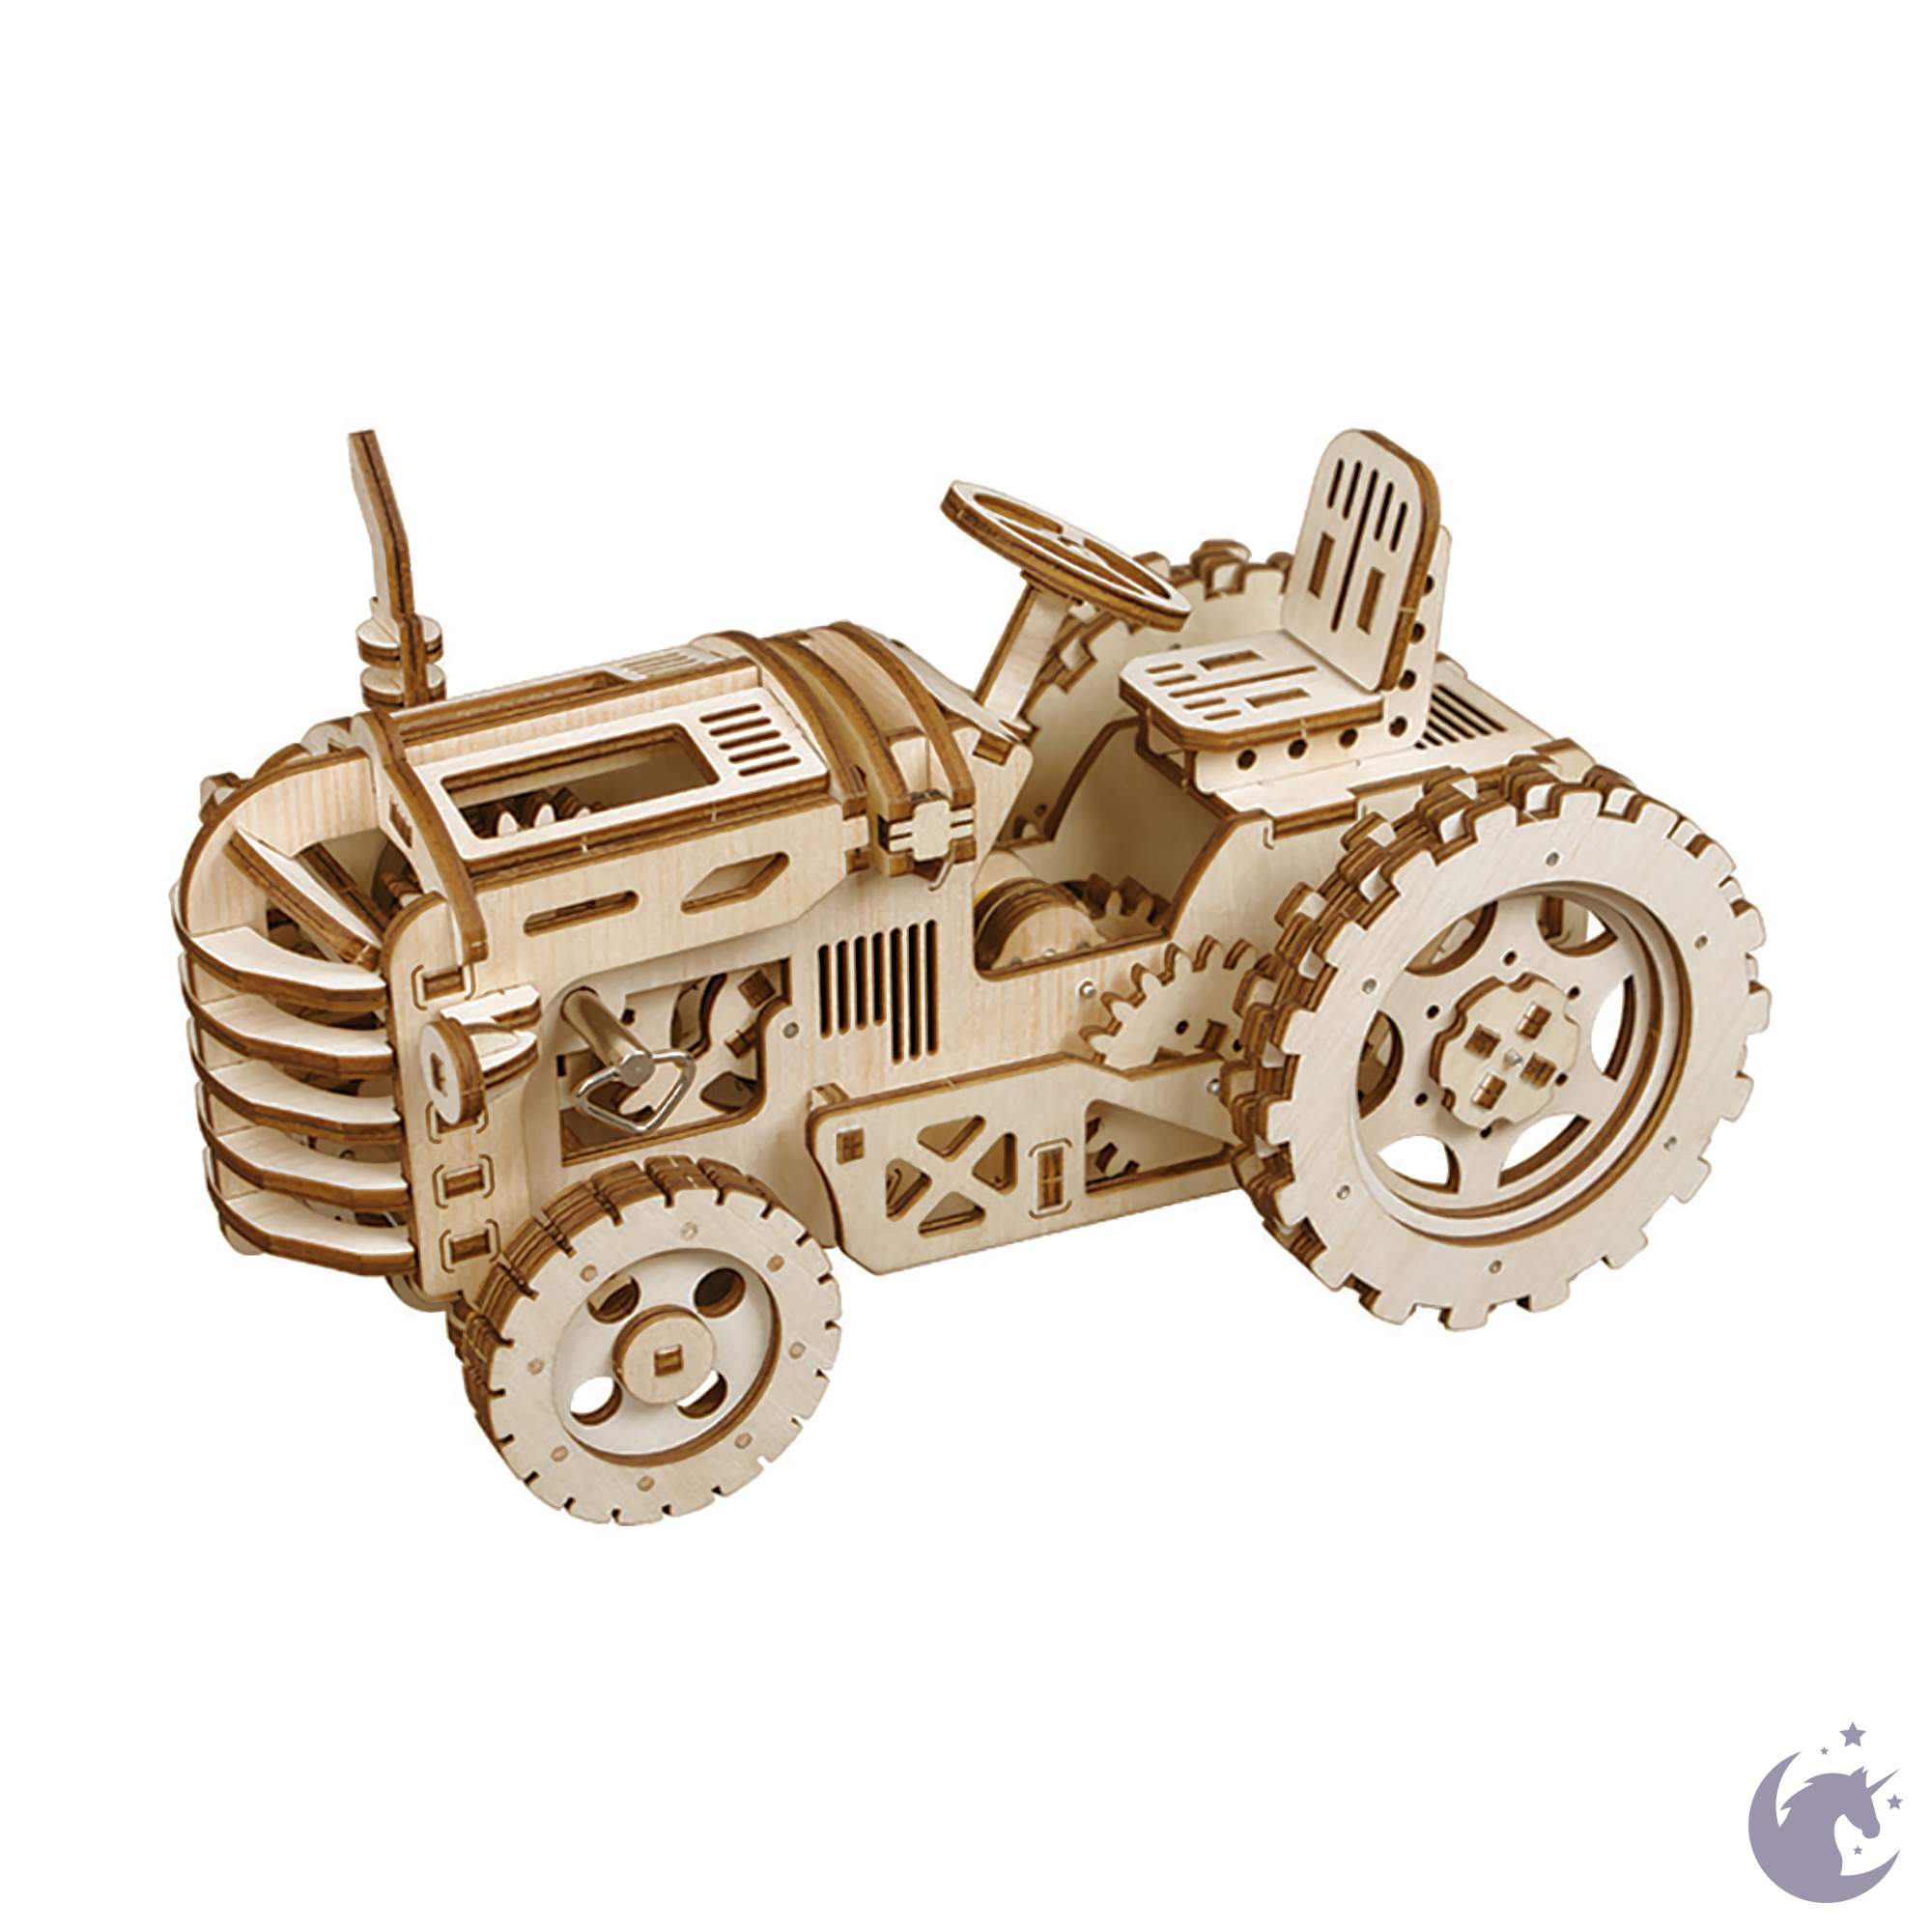 unicorntoys robotime rokr windup tractor diy mechanical model building 3d wooden puzzle kit birthday gifts for teen LK401